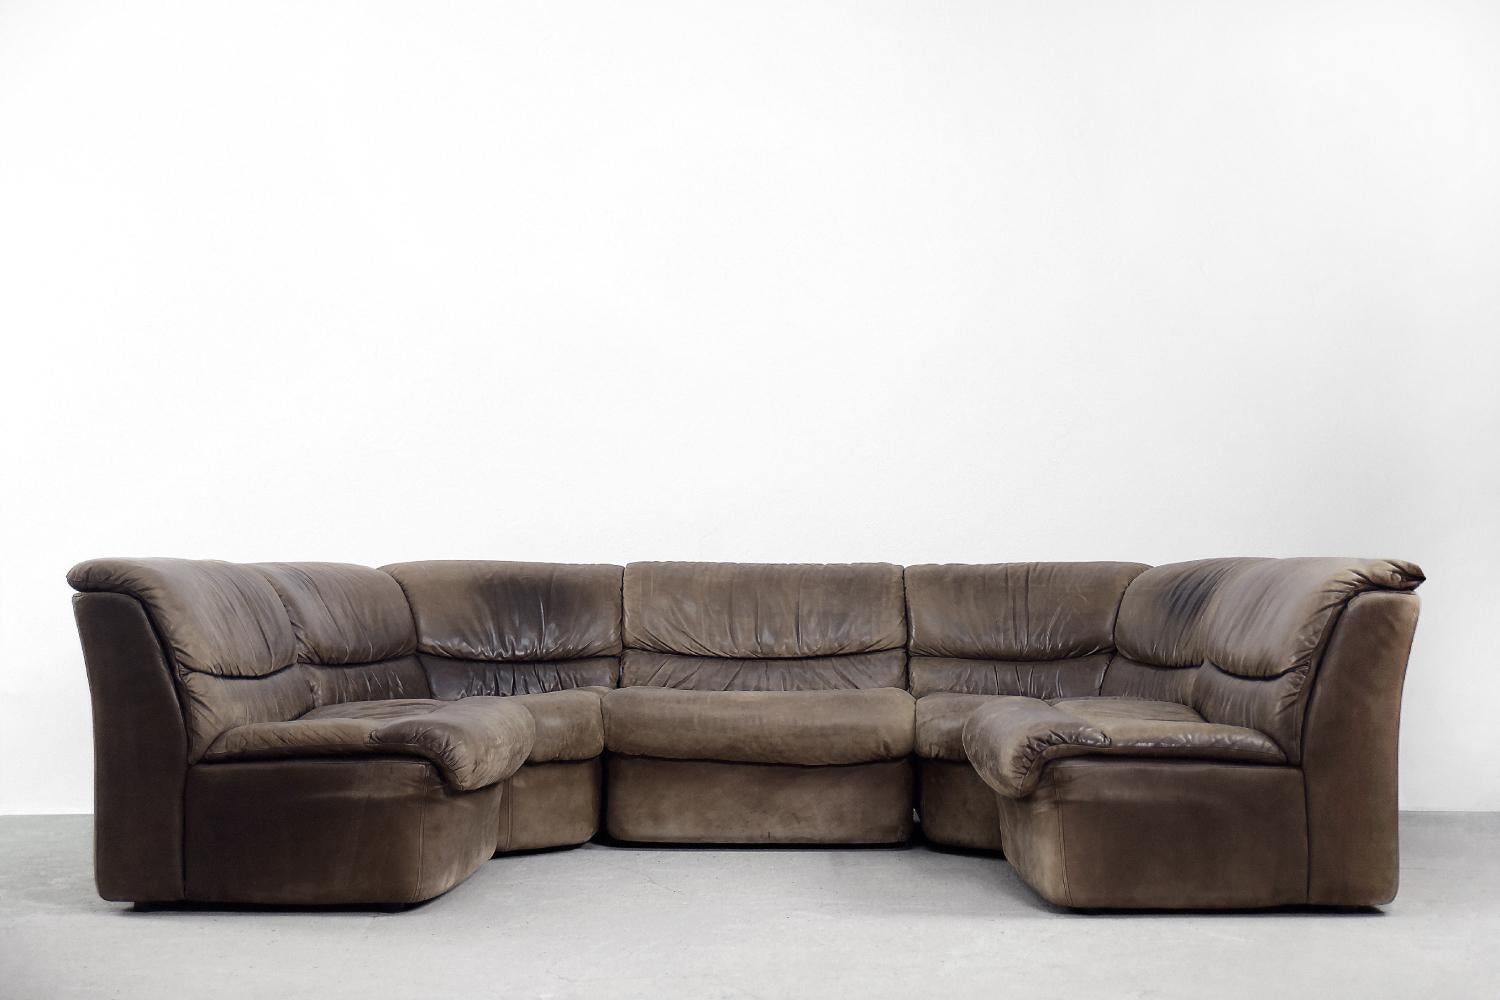 This modular, leather sofa was produced by the German Musterring manufacture during the 1960s. The sofa is completely upholstered in dark brown natural leather. It consists of five modules, including two corner ones. This configuration gives many